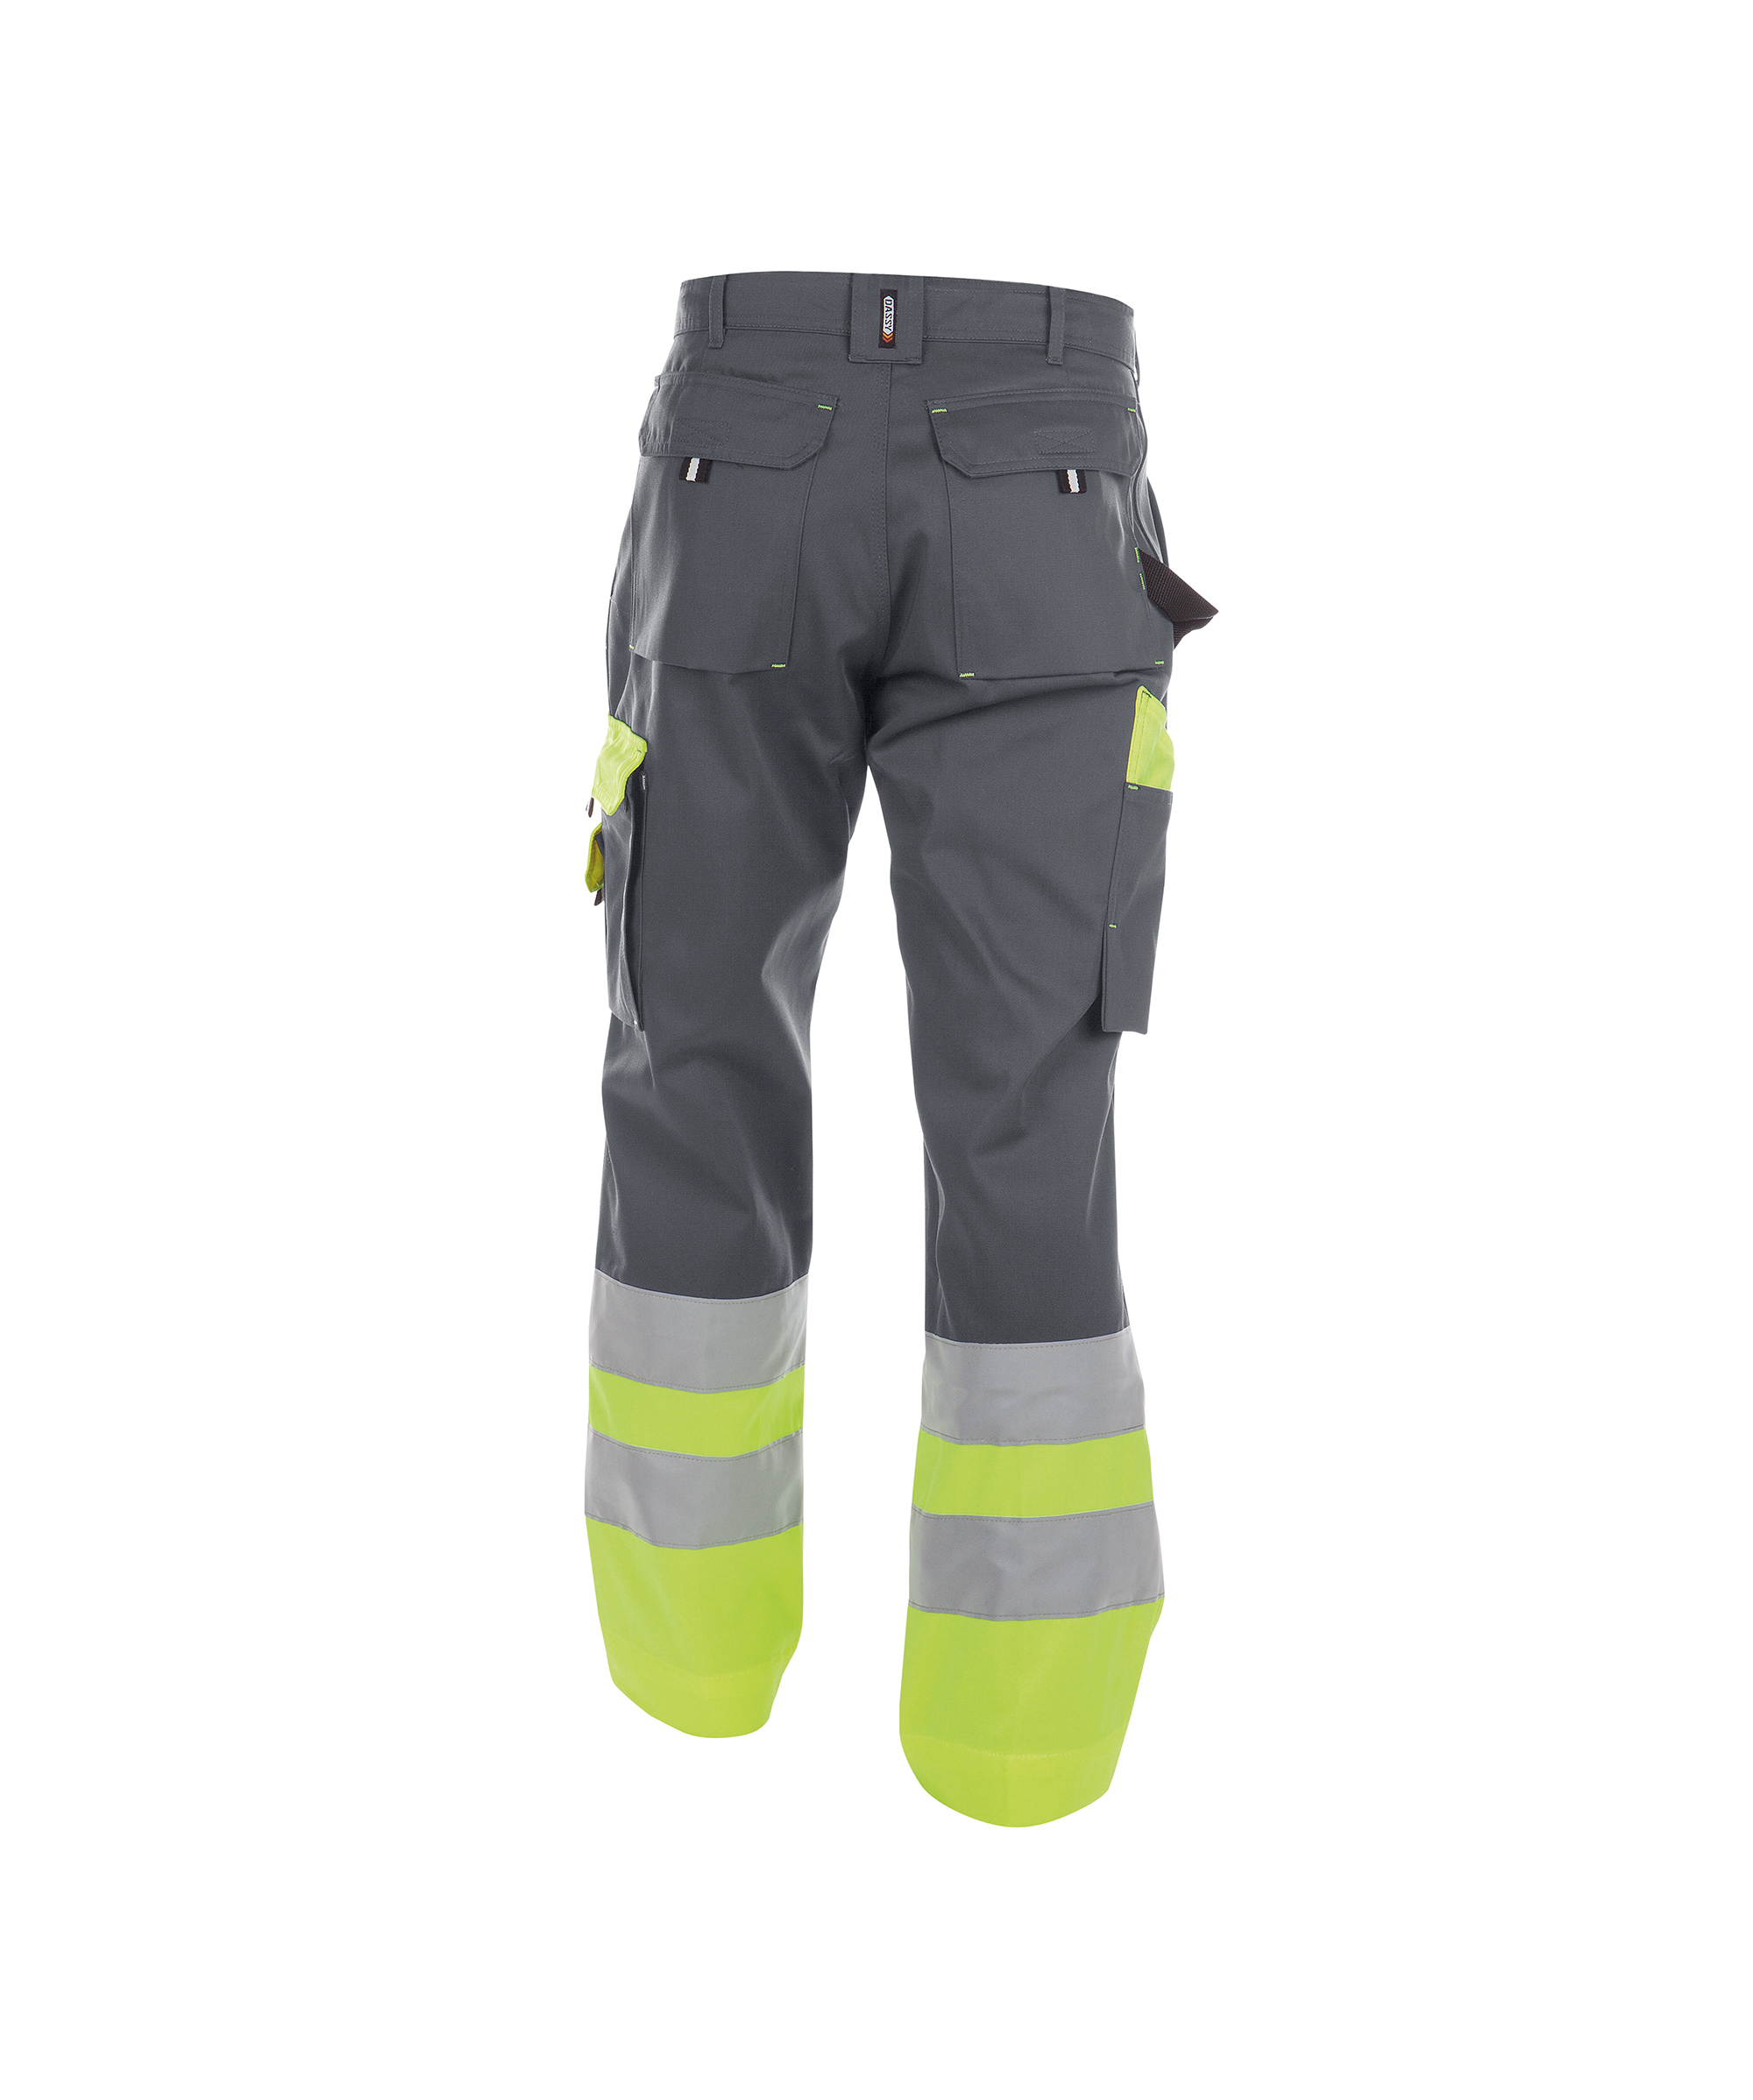 omaha_high-visibility-work-trousers_cement-grey-fluo-yellow_back.jpg